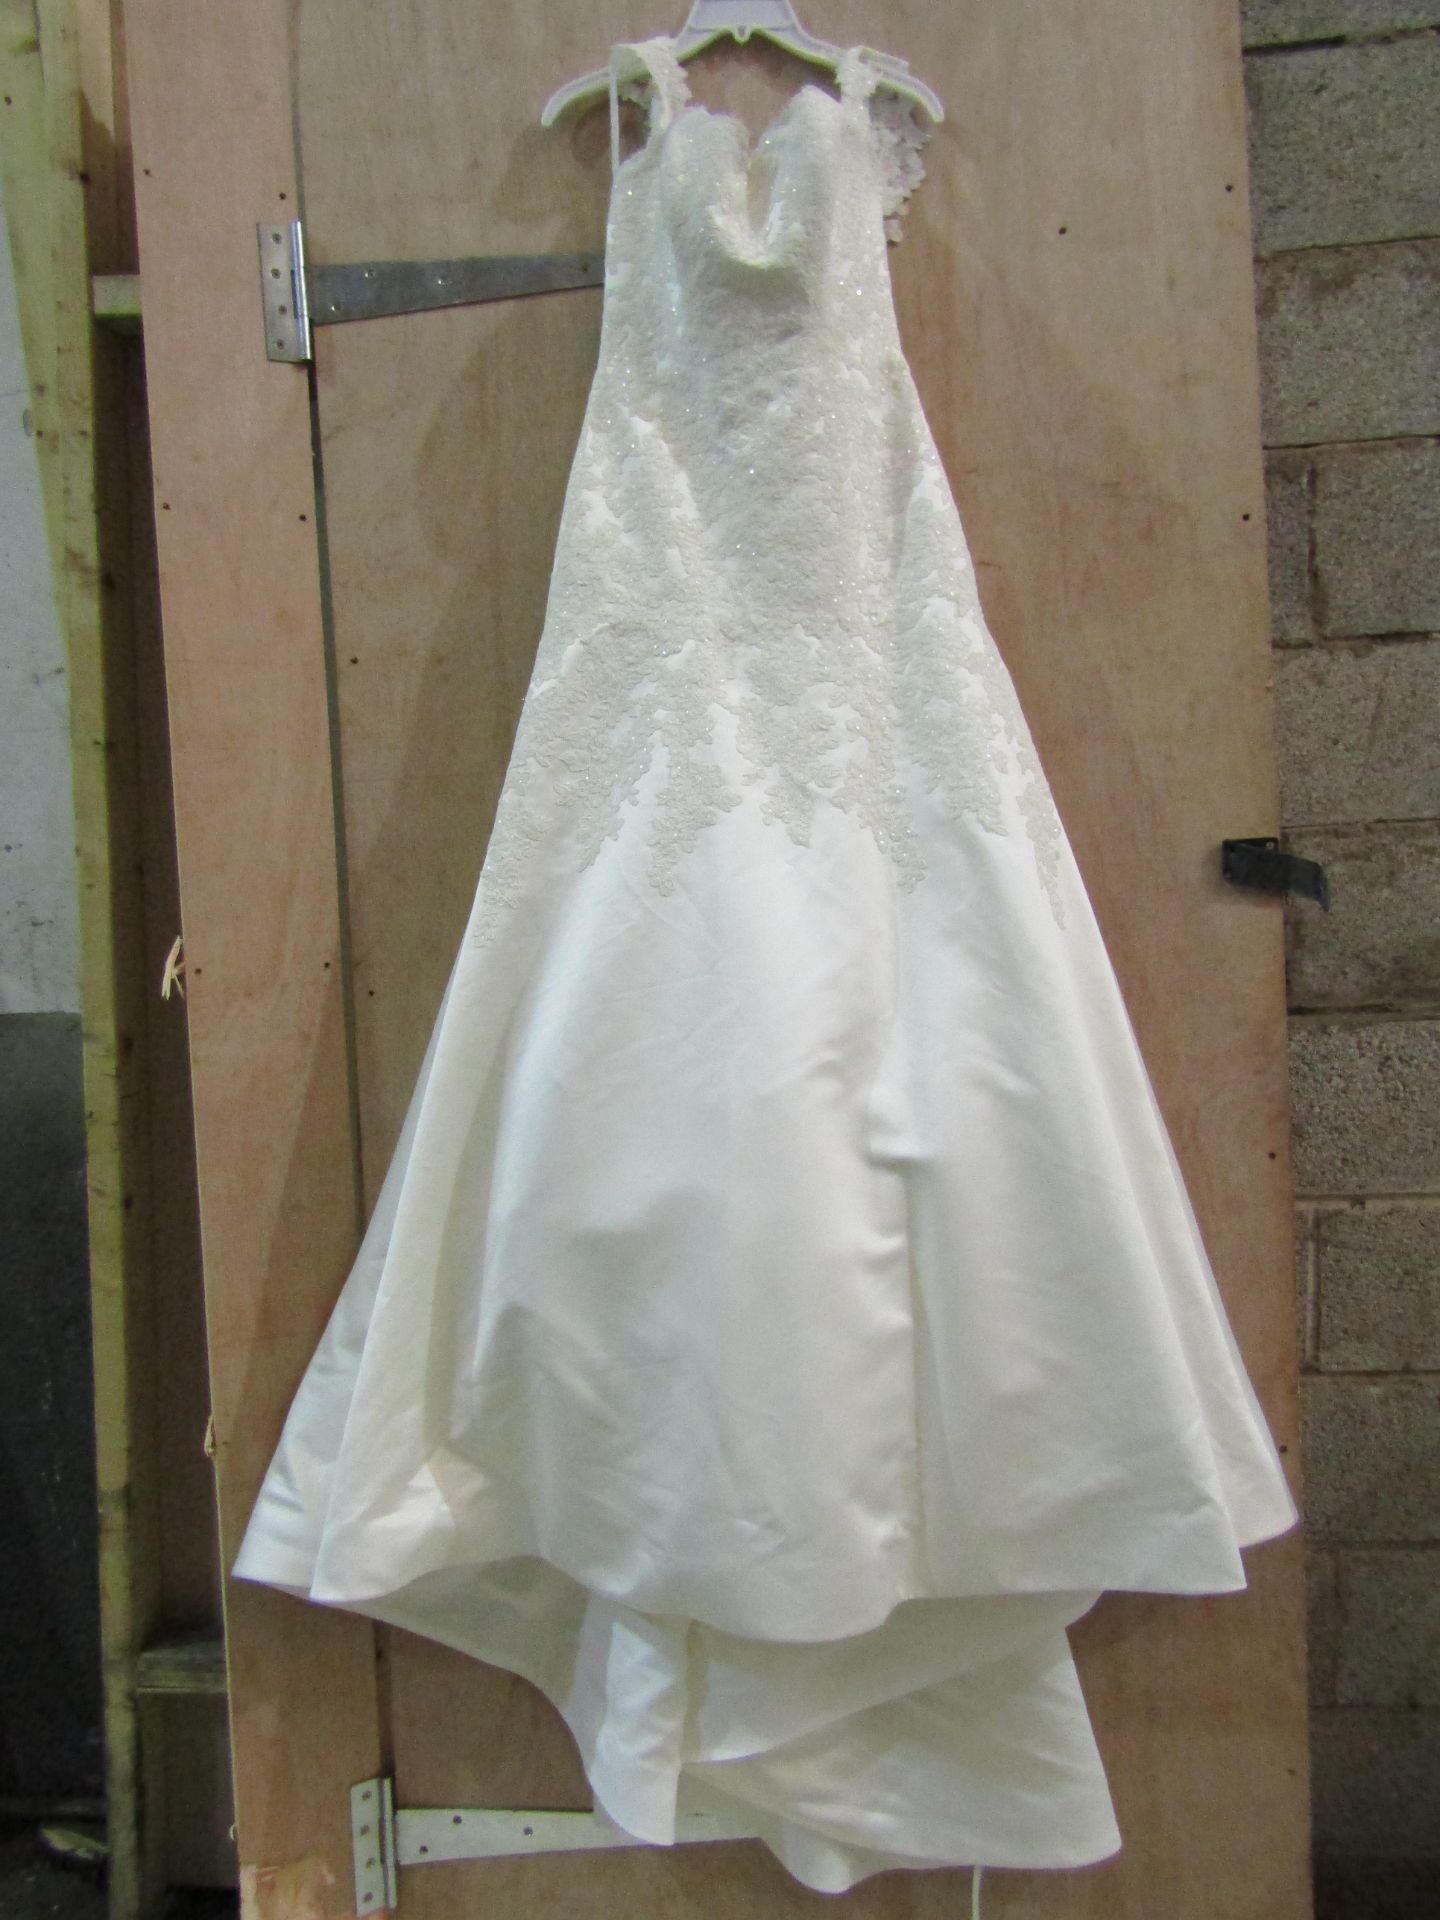 Approx 500 pieces of wedding shop stock to include wedding dresses, mother of the bride, dresses, - Image 87 of 108